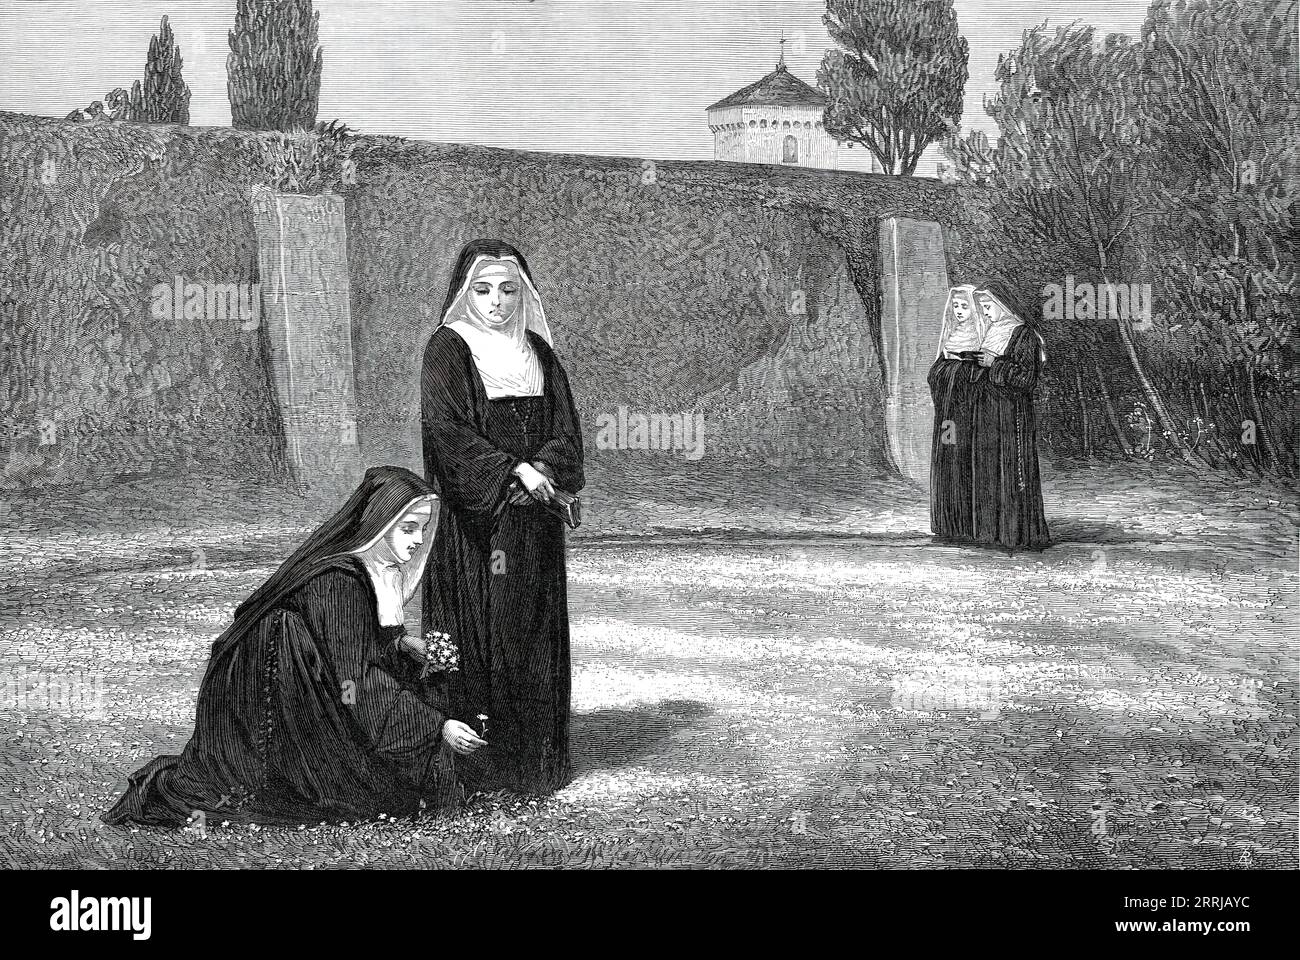 &quot;Easter&quot; by Edwin Bale, from the exhibition at the Dudley Gallery, 1876. Engraving of a painting. 'In this picture...we see a very peaceful scene of convent life, the quiet nuns enjoying the leisure of a sacred holiday in their secluded garden. They gather cowslips from amidst the sweet earthly verdure of the lawn, and hold sweet counsel together, no doubt, upon the privileges of the heavenly life. It is a soothing example of the tranquil mind...'. From &quot;Illustrated London News&quot;, 1876. Stock Photo